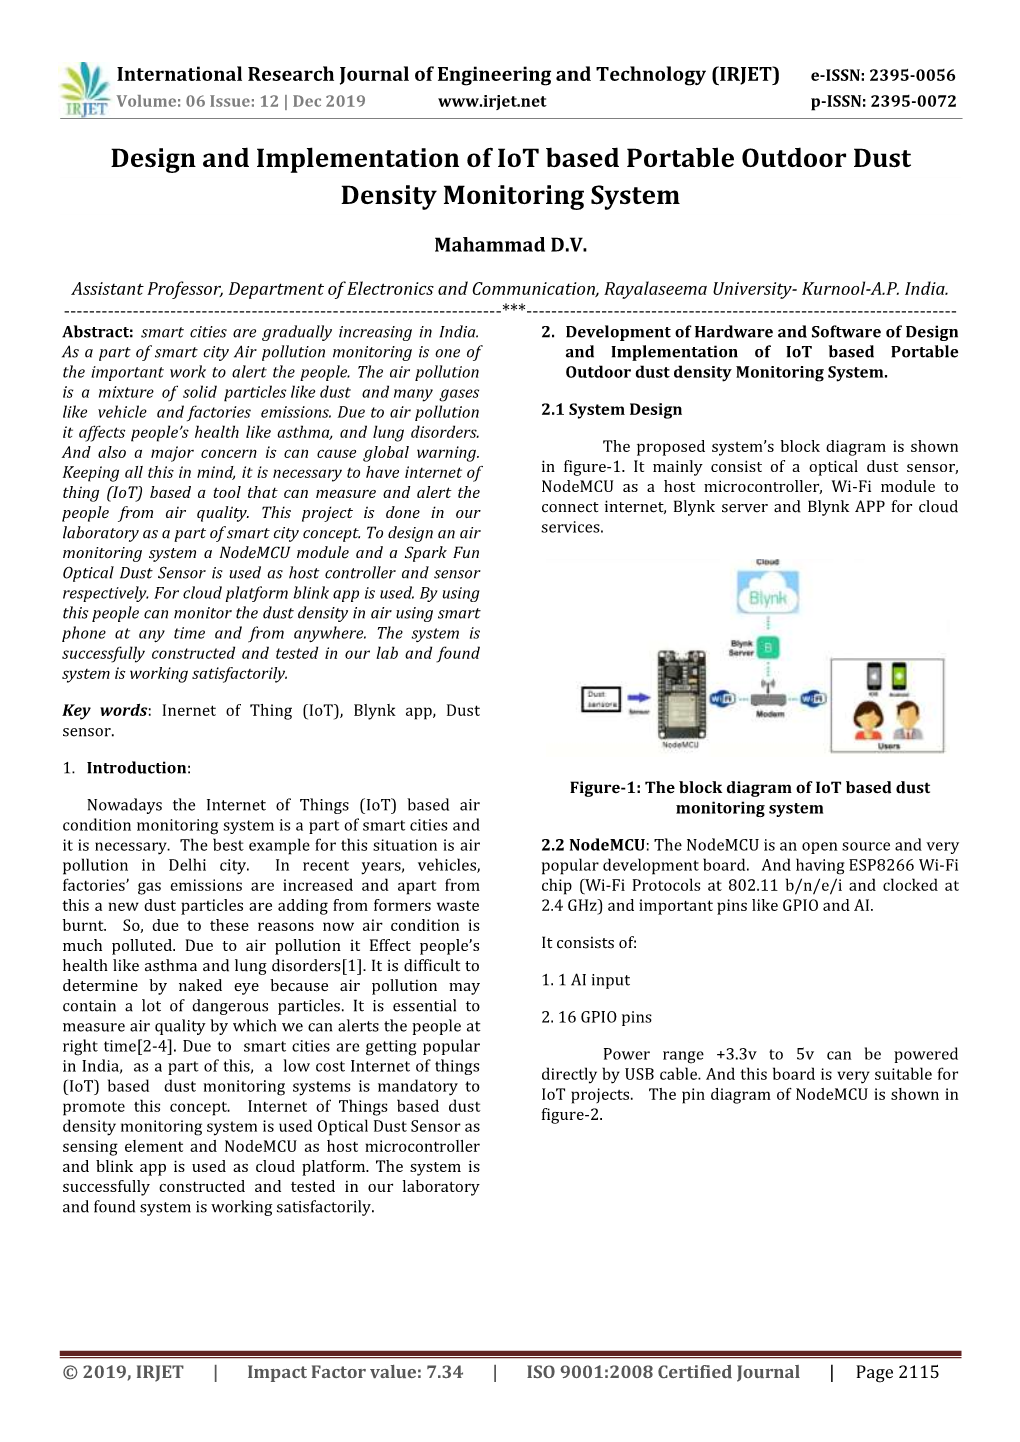 Design and Implementation of Iot Based Portable Outdoor Dust Density Monitoring System